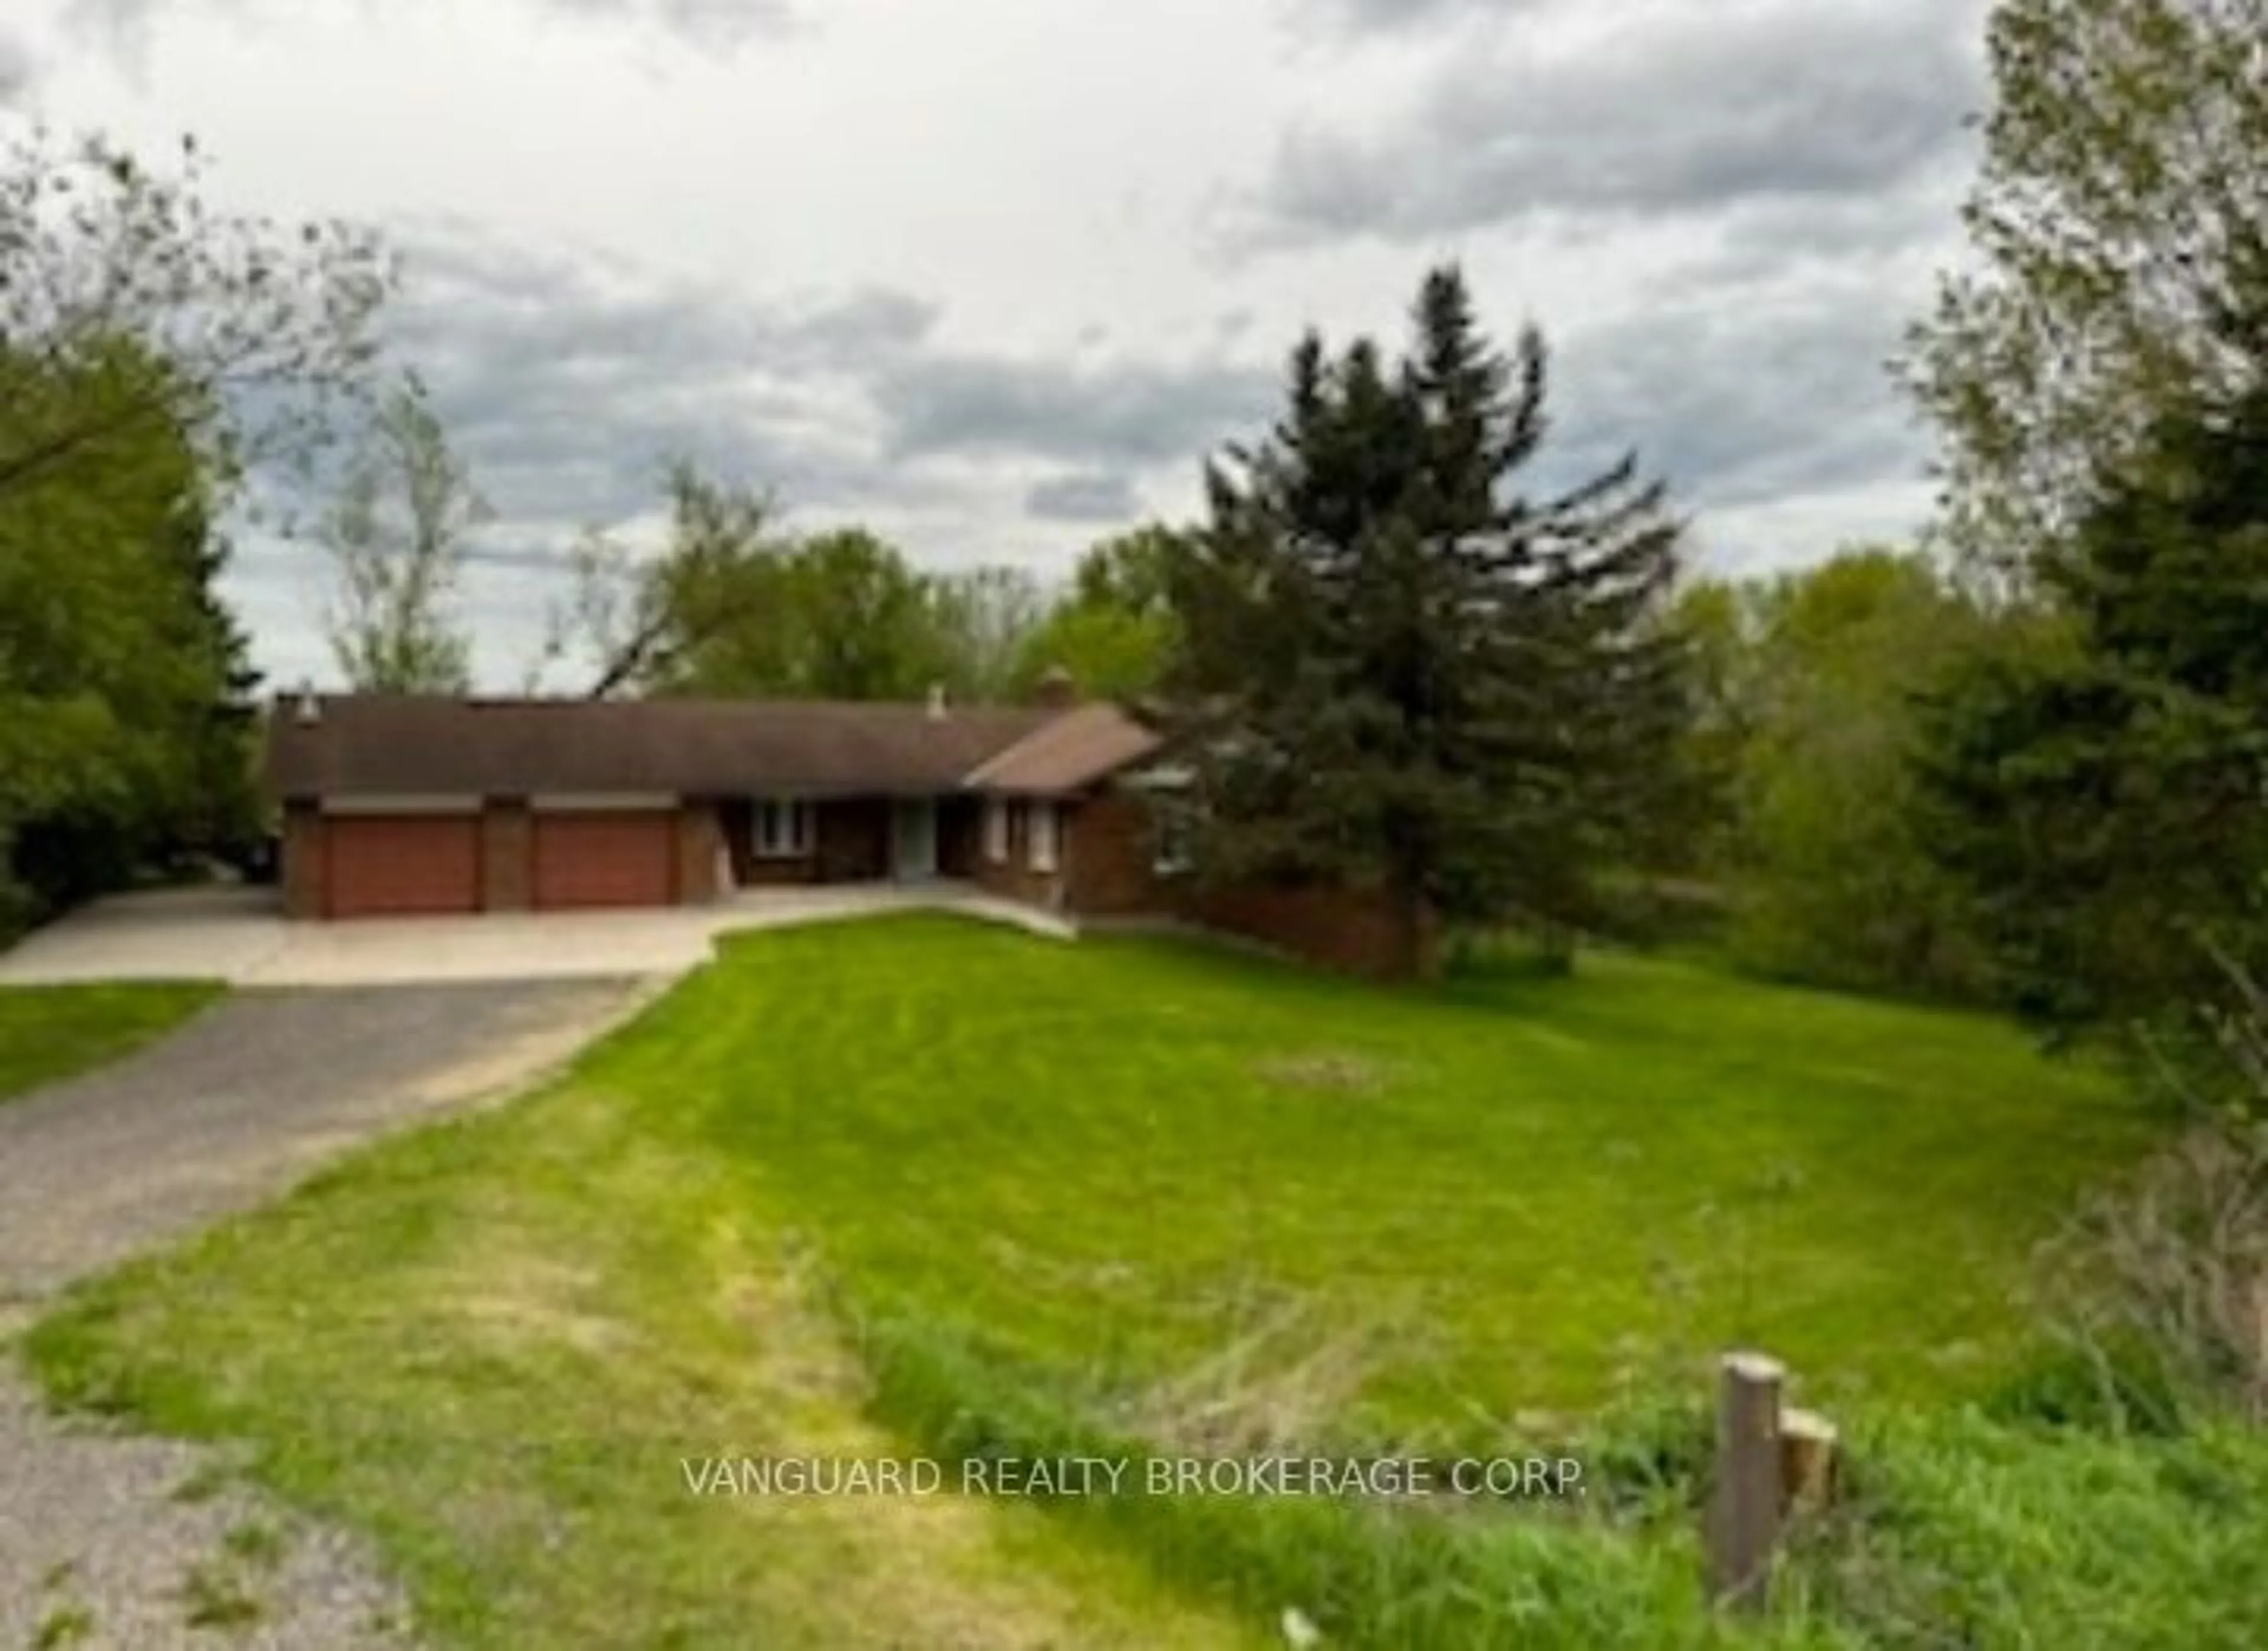 Frontside or backside of a home for 4233 Line 2, Bradford West Gwillimbury Ontario L0G 1T0